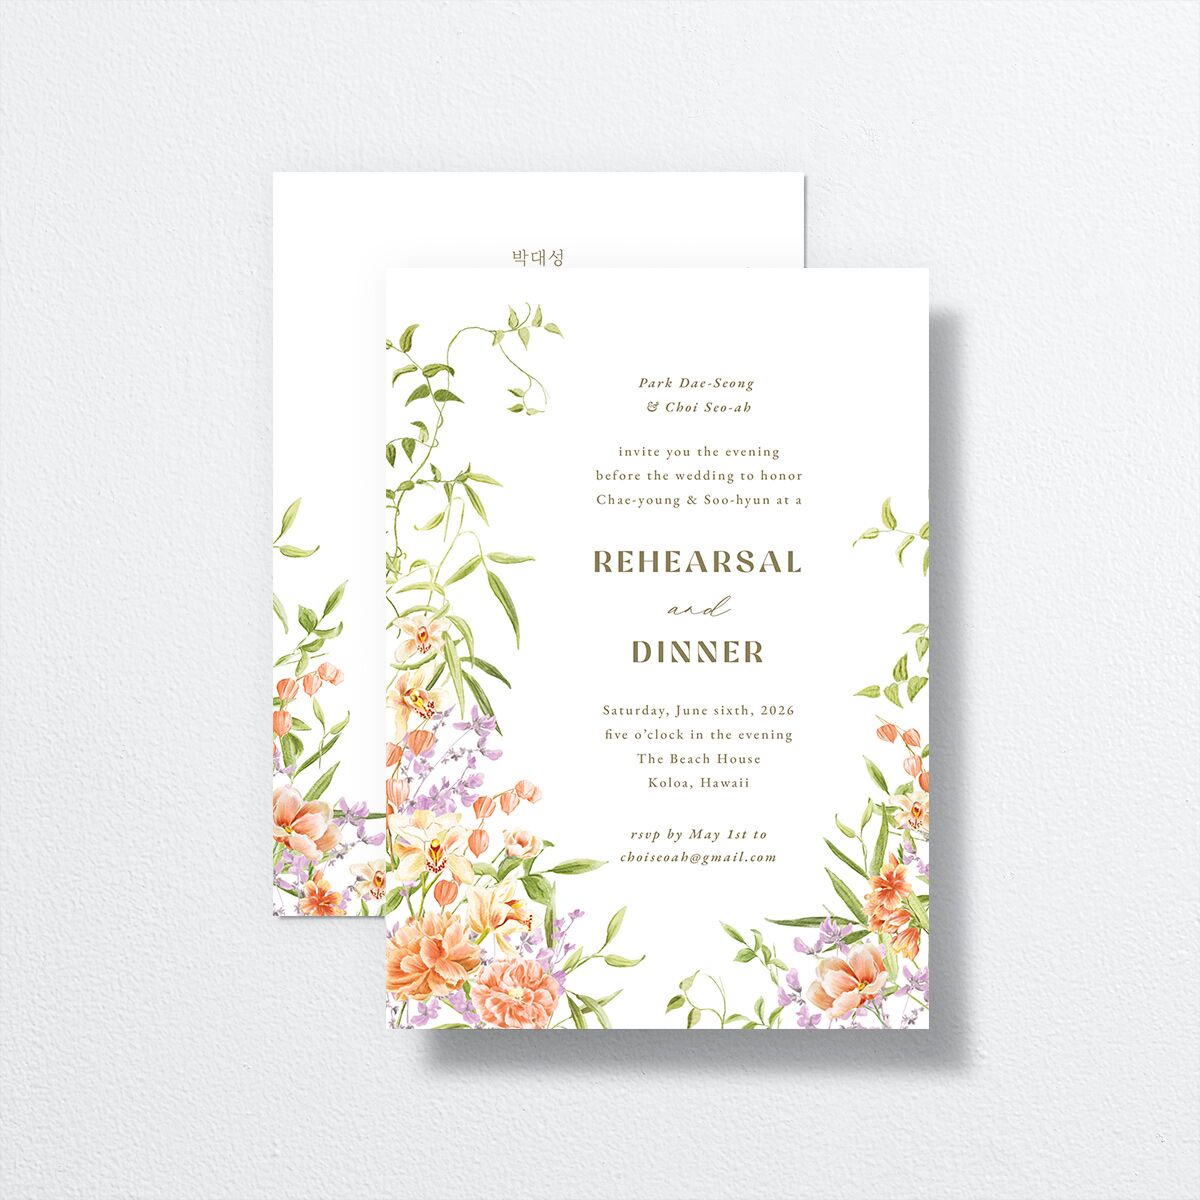 Bom Bloom Rehearsal Dinner Invitations front-and-back